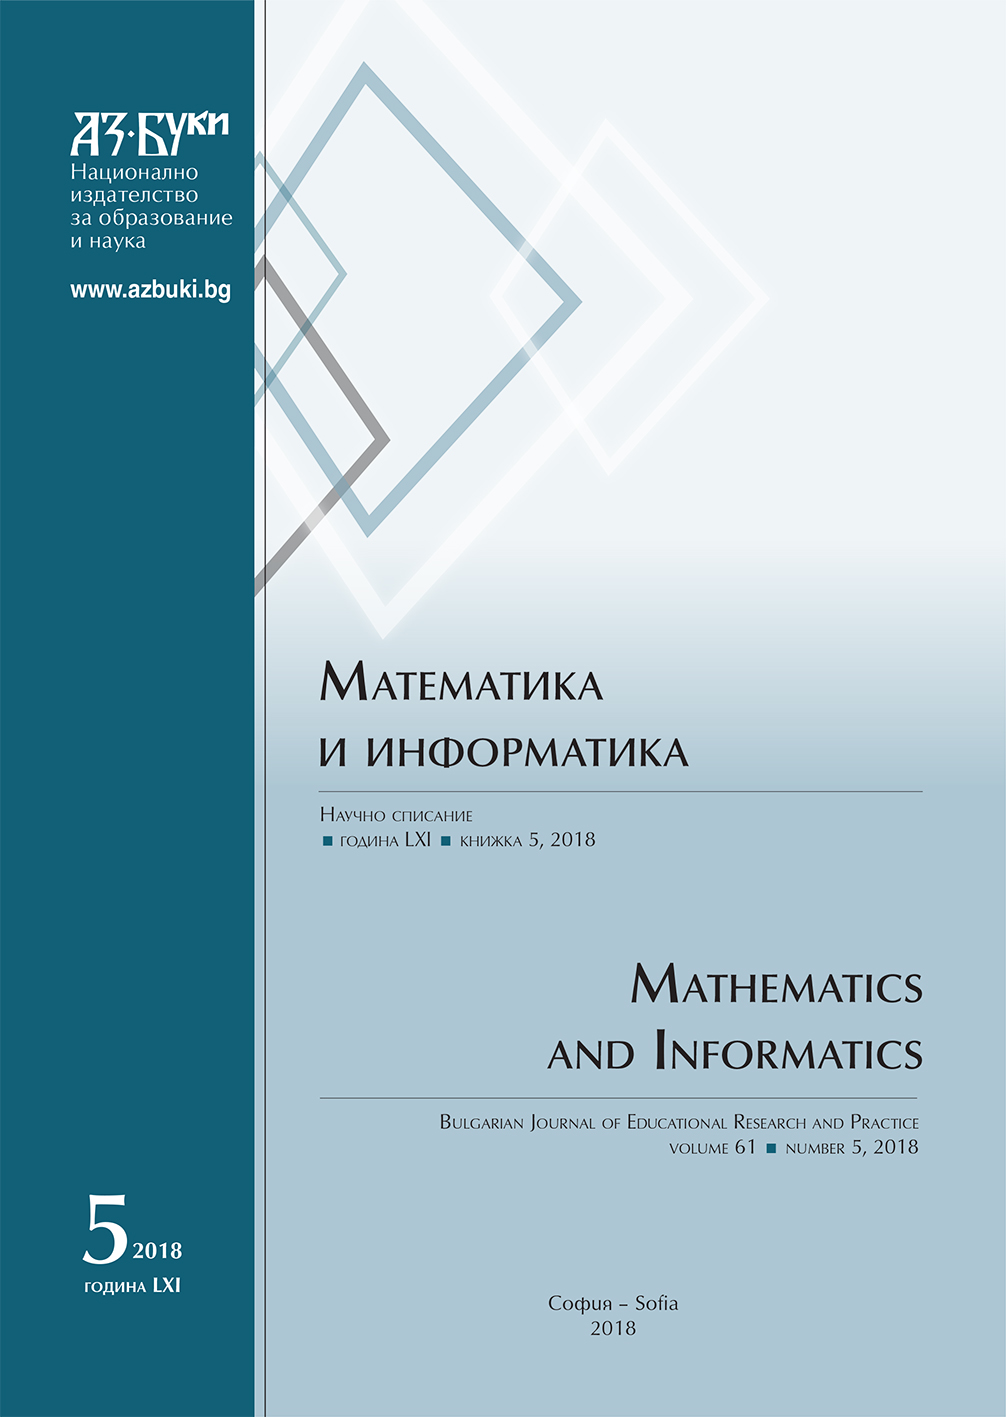 Construction of a Type of Algebraic Curves in the Plane of a Triangle Cover Image